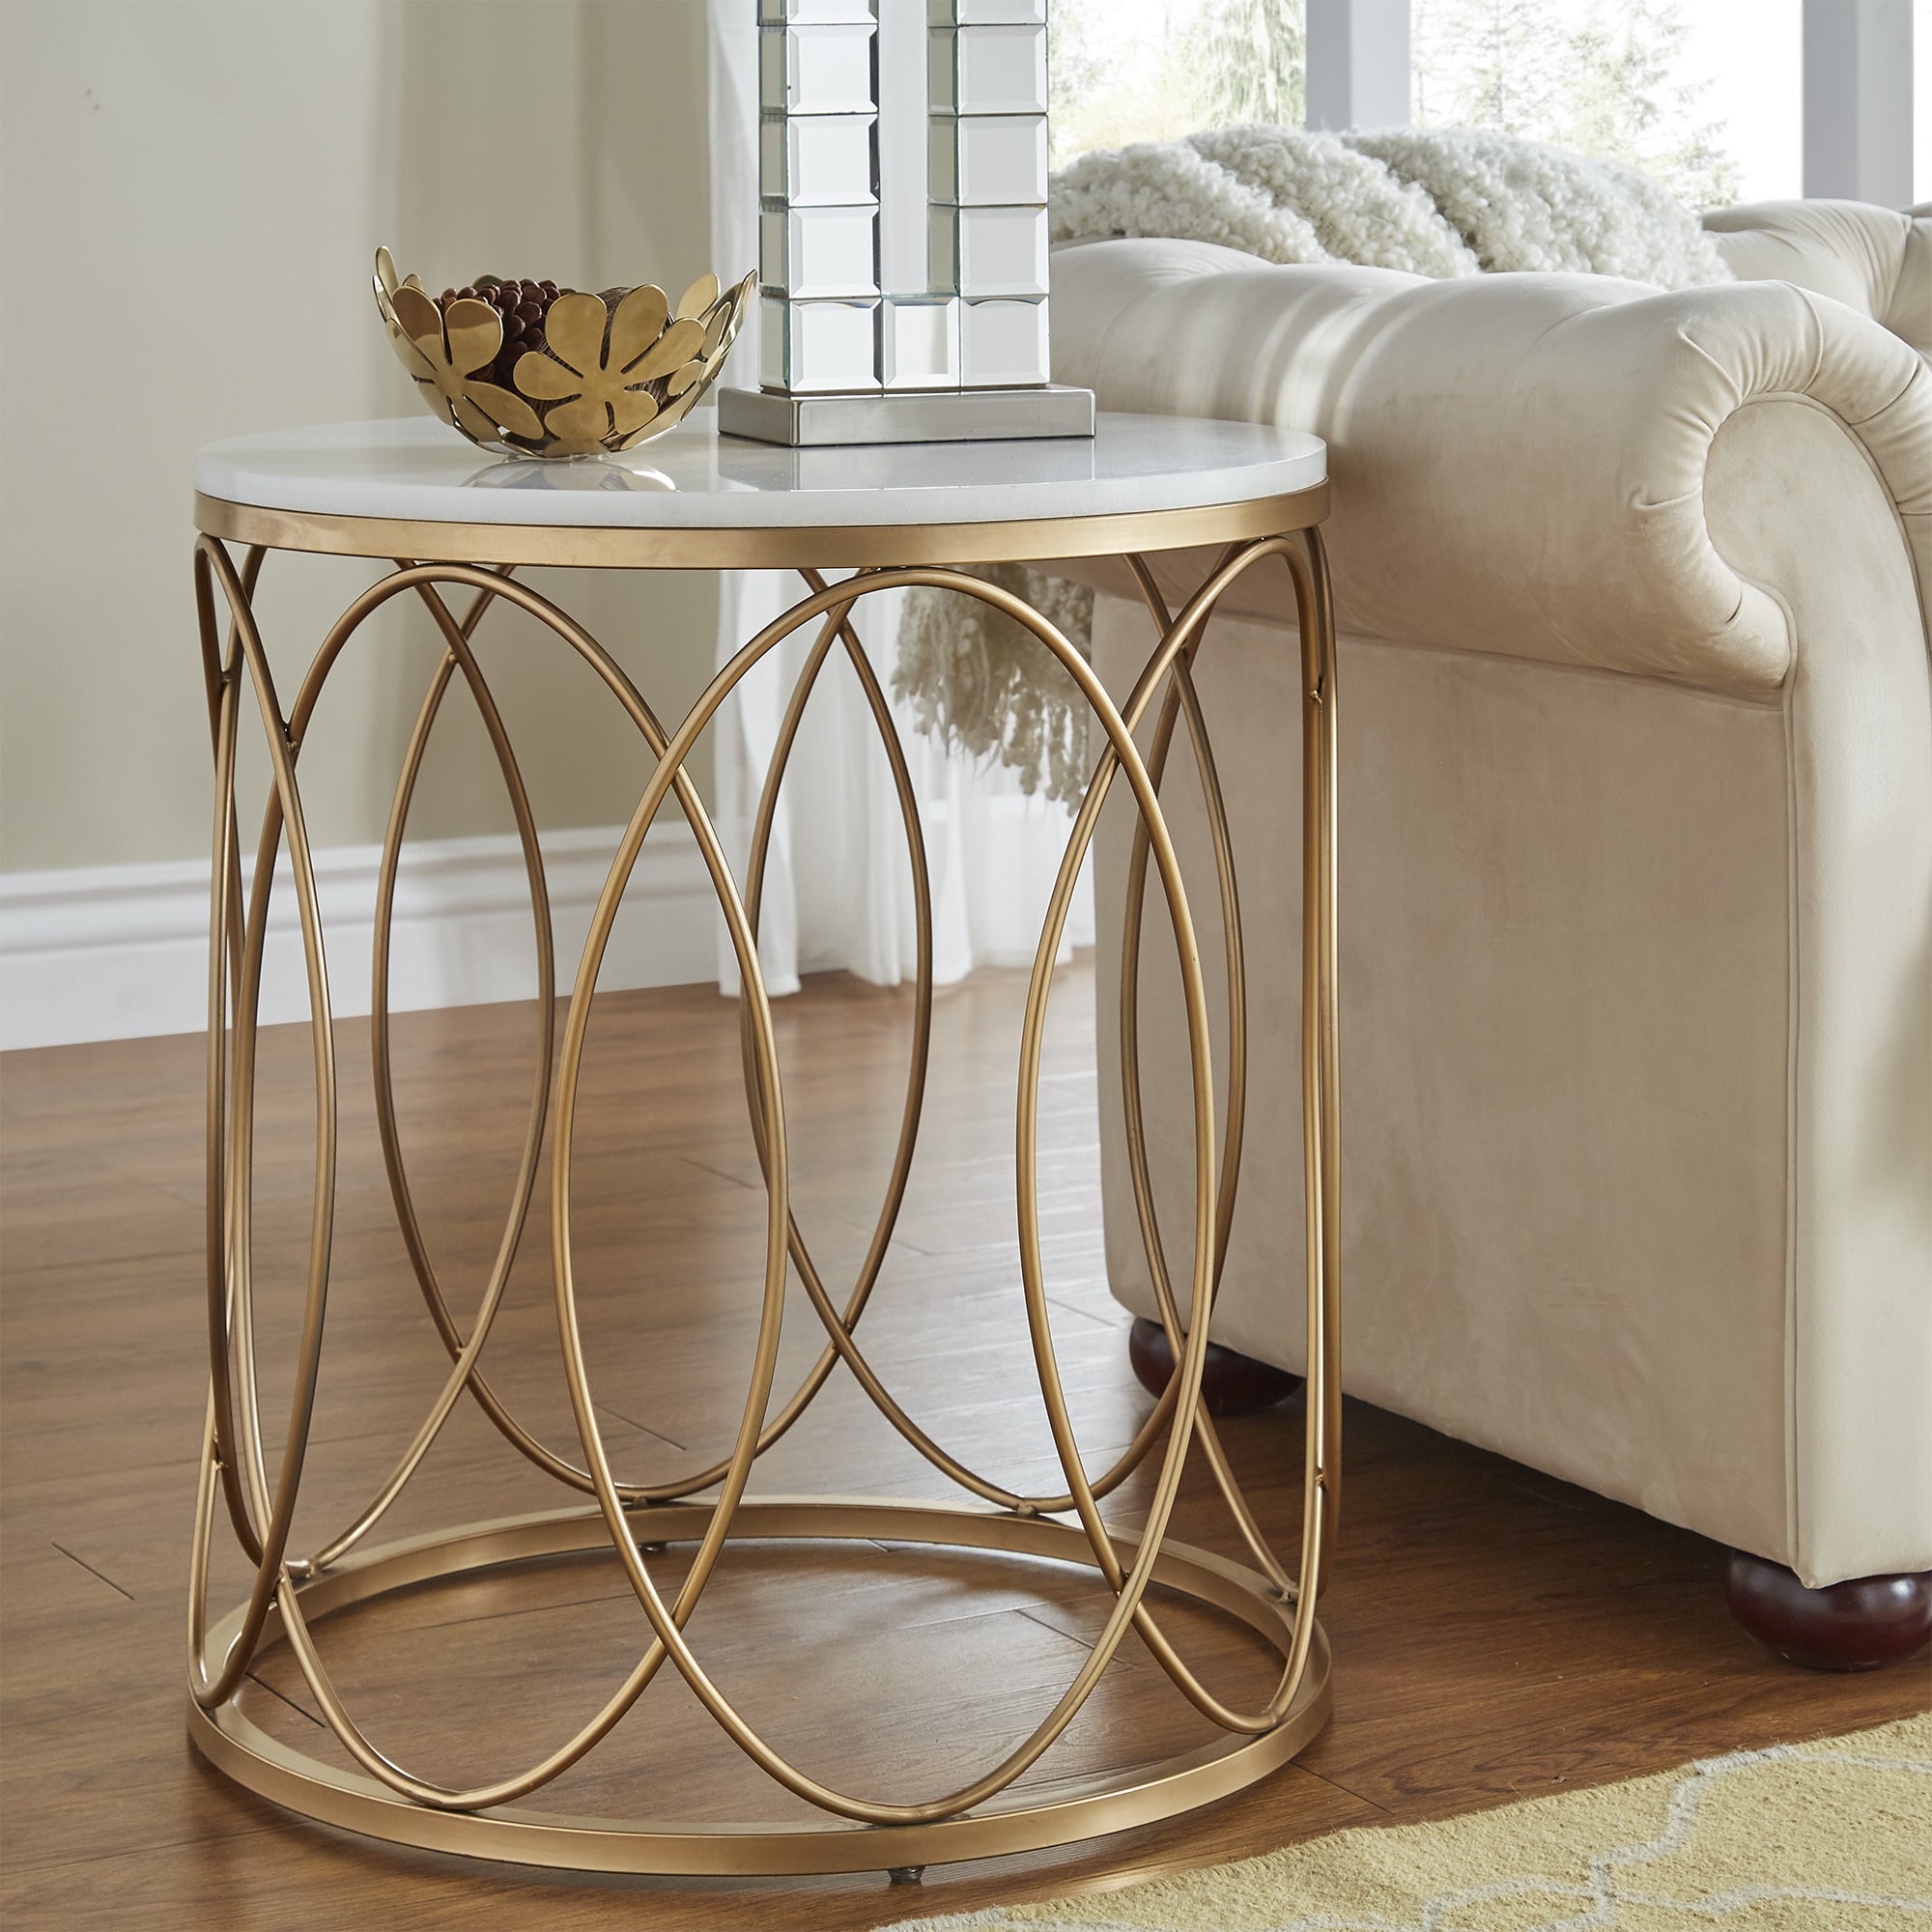 lynn round gold end table with marble top inspire bold accent free shipping today chairs under mosaic outdoor dining office wall cabinets oriental ginger jar lamps extendable